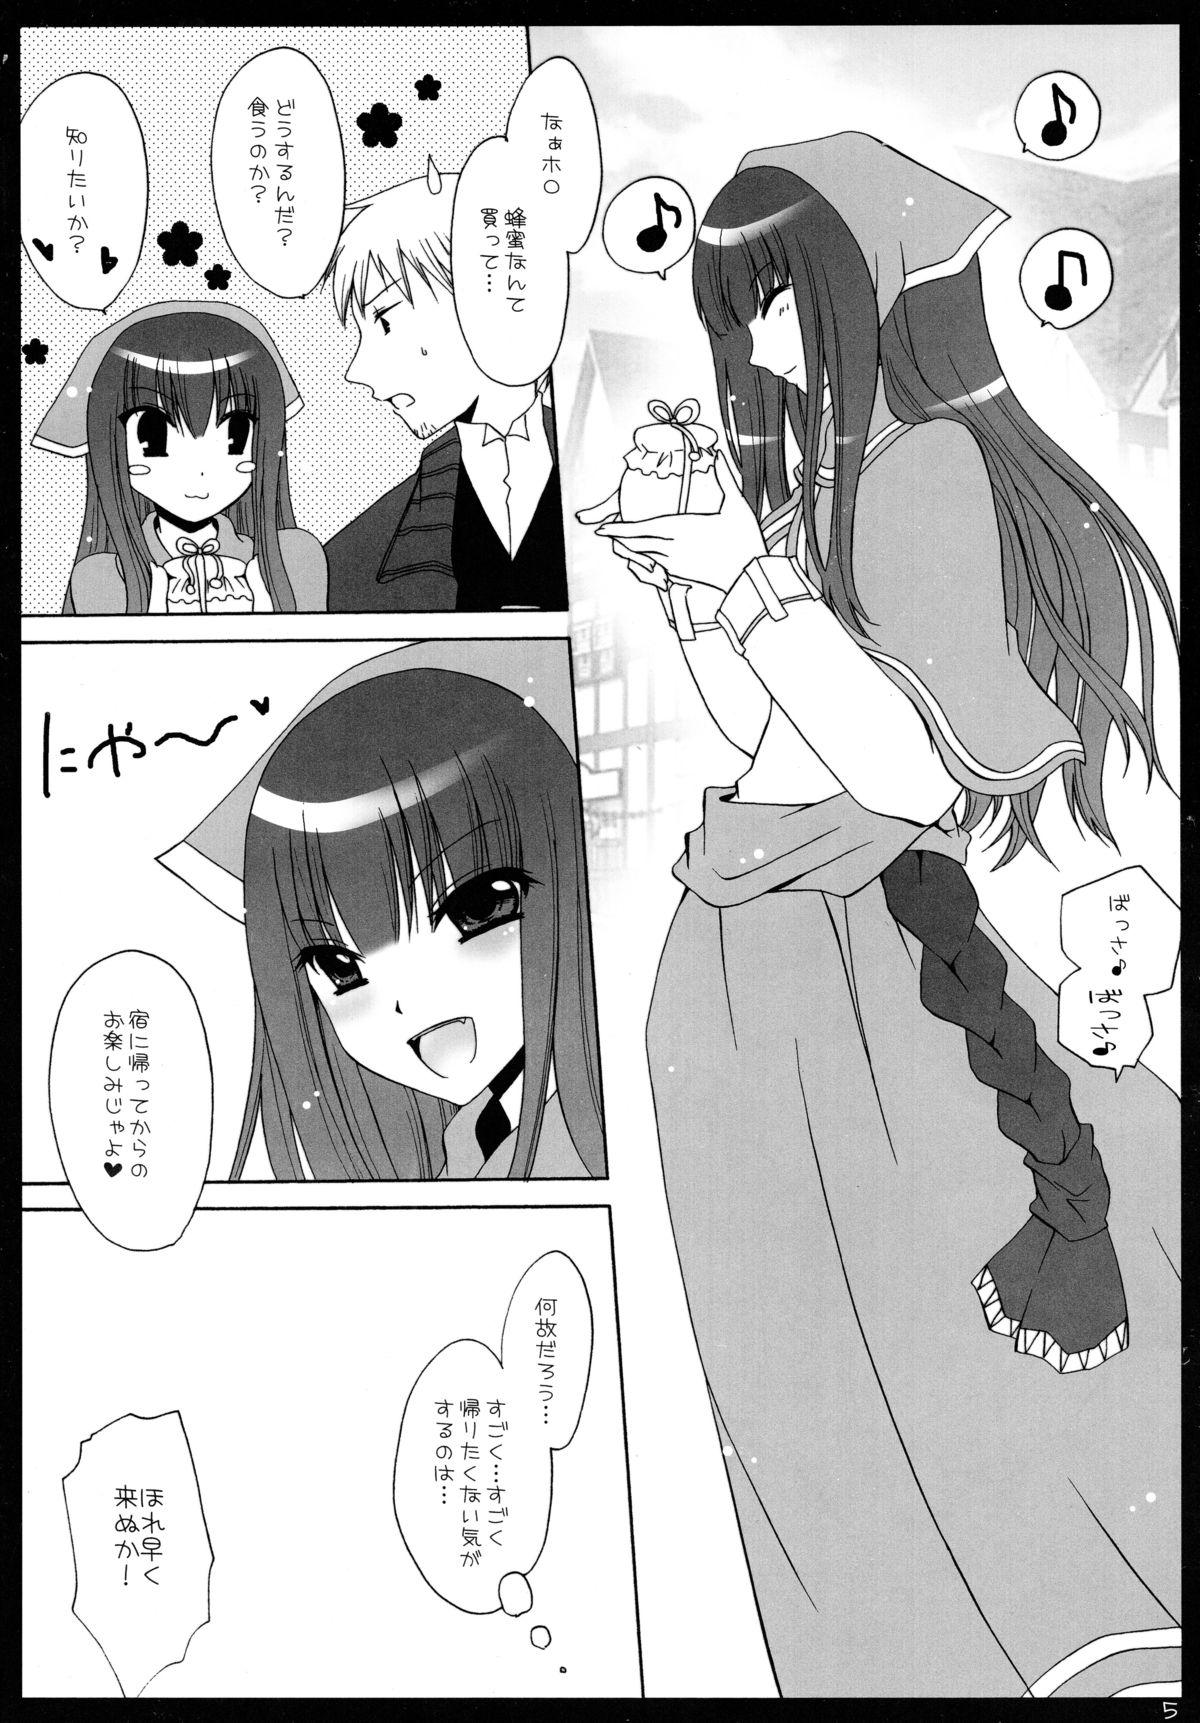 Crazy Ookami Shoujo to Hachimitsu Yuugi - Spice and wolf Fishnet - Page 5